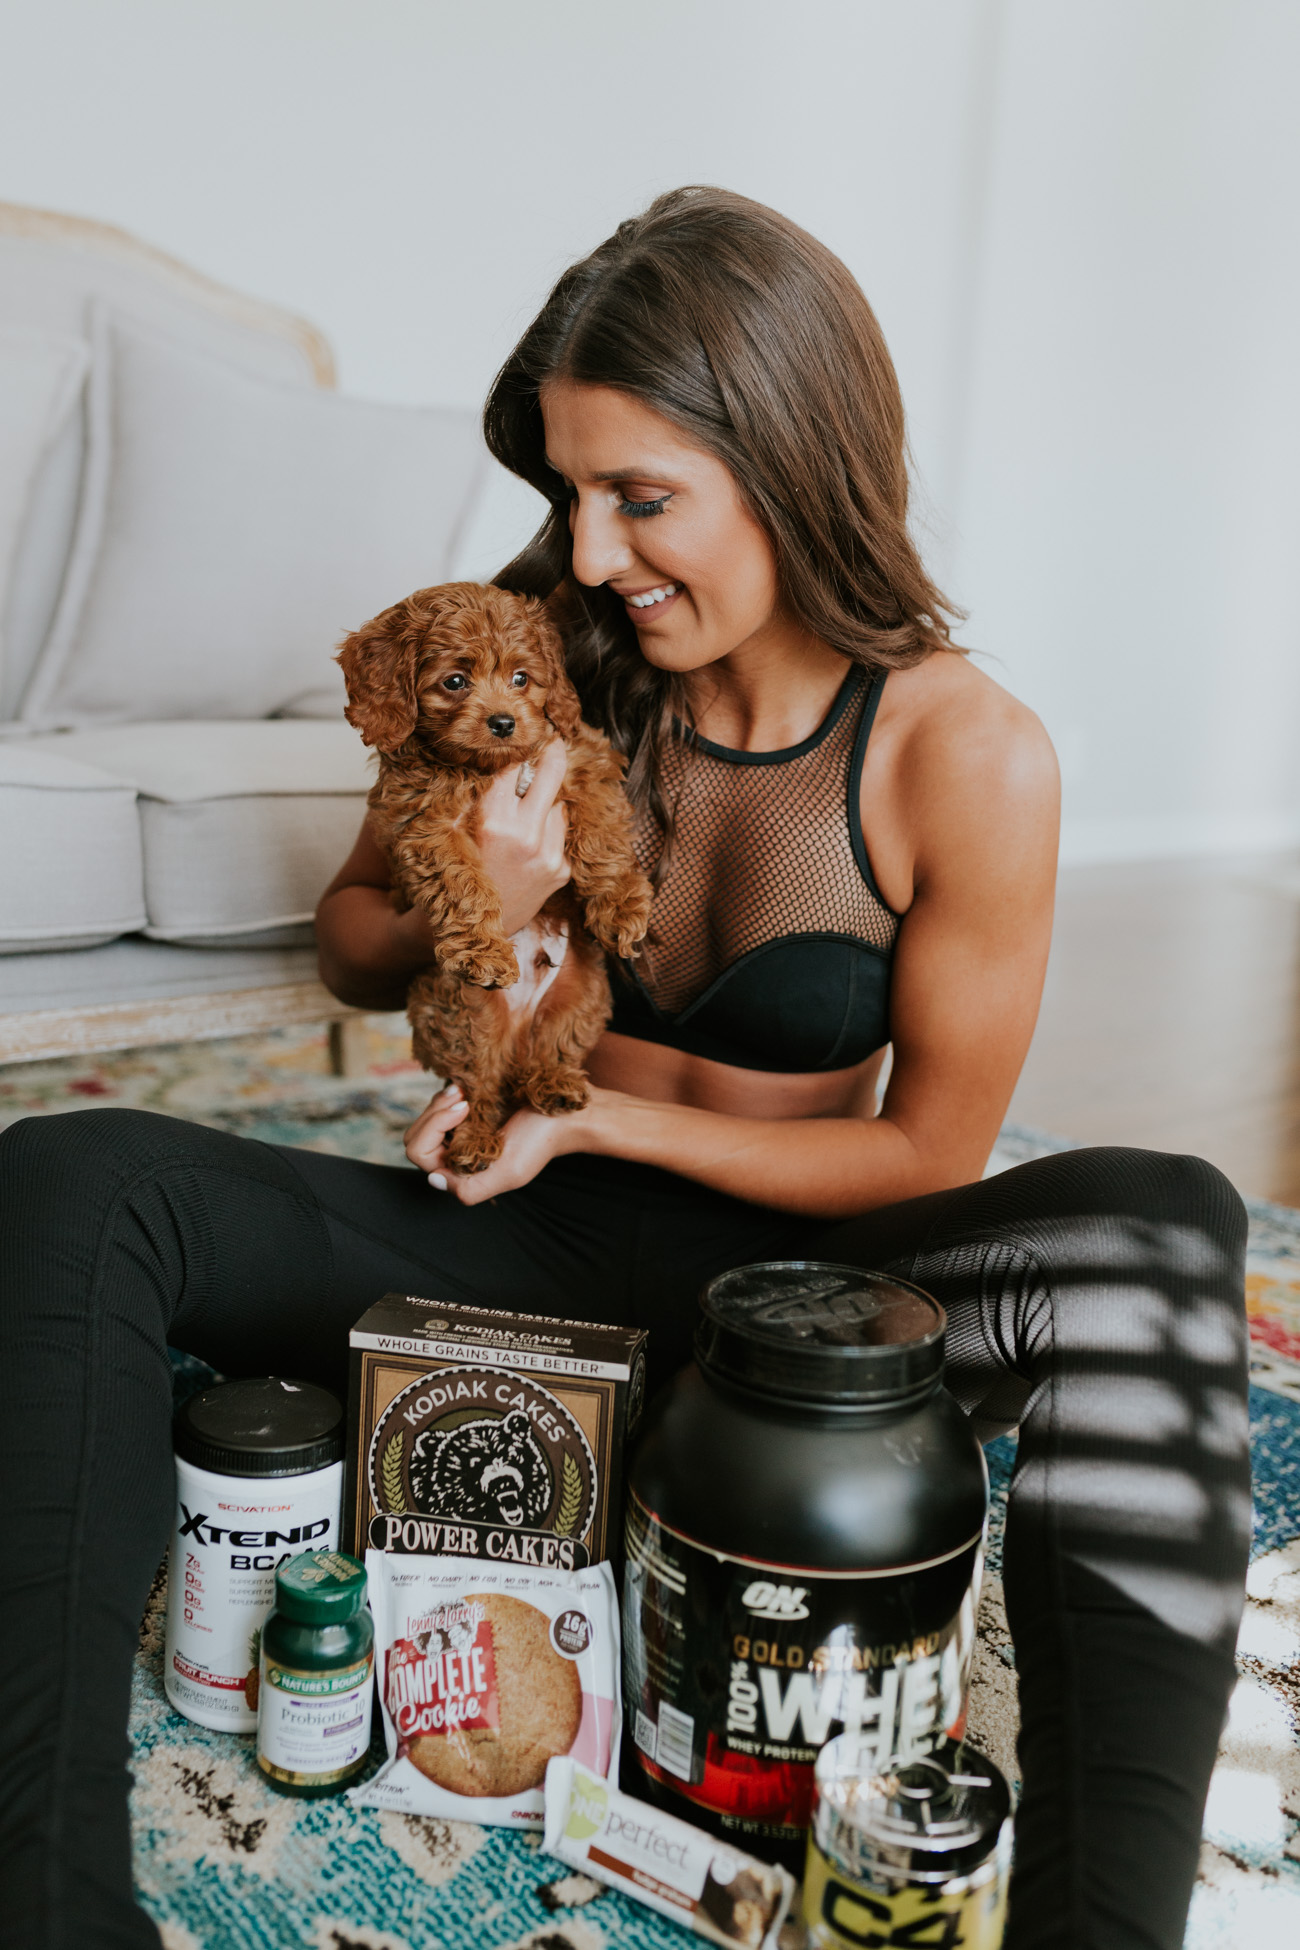 fave fitness snacks and hacks, walmart health and wellness, new years resolutions, fitness snack ideas, kodiak cakes, protein powders // grace white a southern drawl, fitwithasd